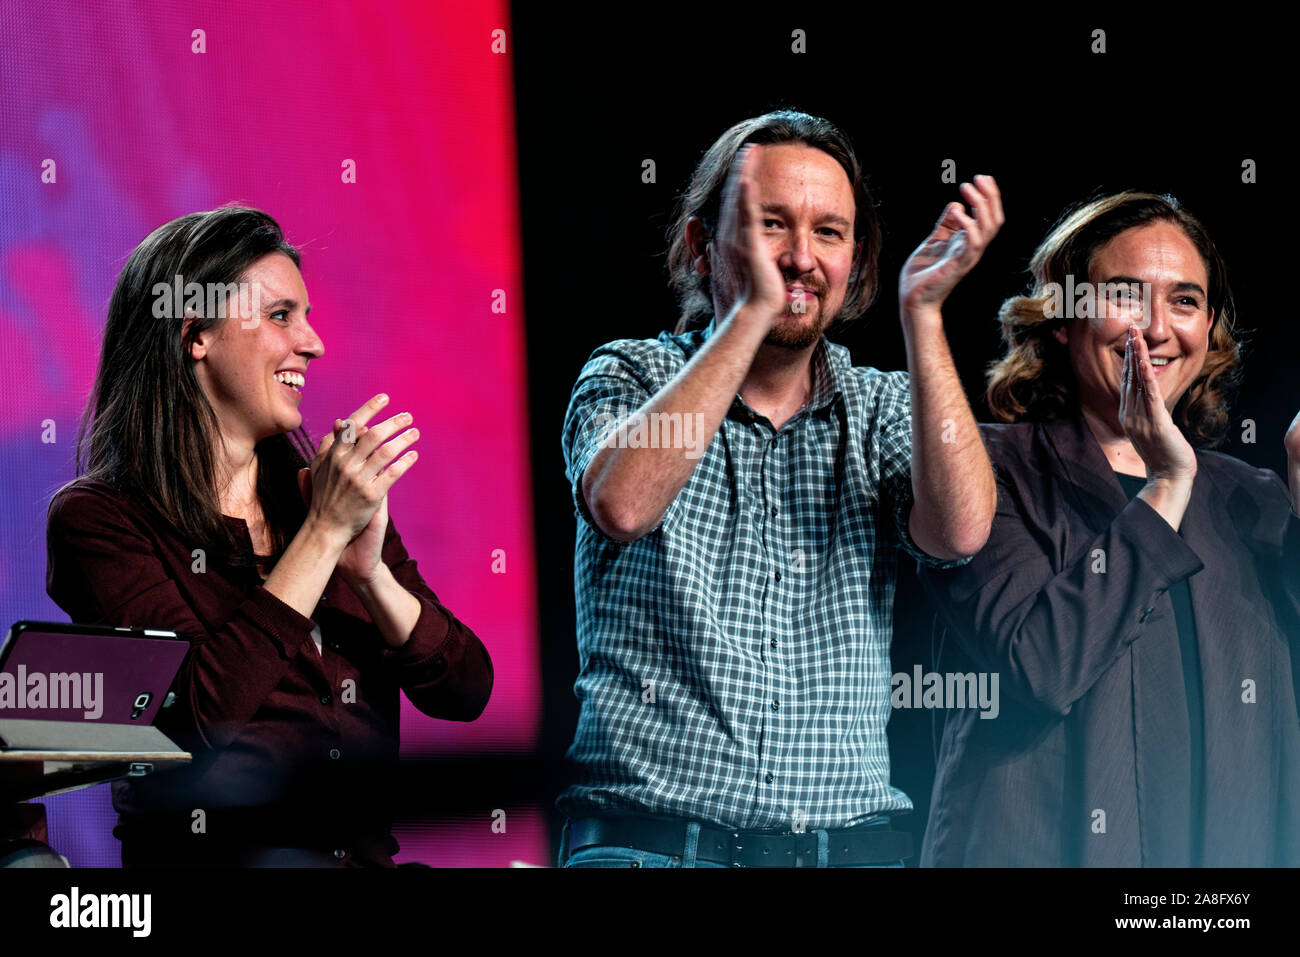 IFEMA, Madrid, Spain. 08th November, 2019. L to R Irene Montero, spokesperson for Unidas Podemos in the Congress of Deputies and candidate for Madrid, Pablo Iglesias, secretary general of Podemos and candidate of Unidas Podemos for the Presidency of the Government, Ada Colau, mayor of Barcelona, at the last event of Unidas Podemos party before the campaign closure for the General Elections in Spain. Credit: EnriquePSans/Alamy Live News Stock Photo